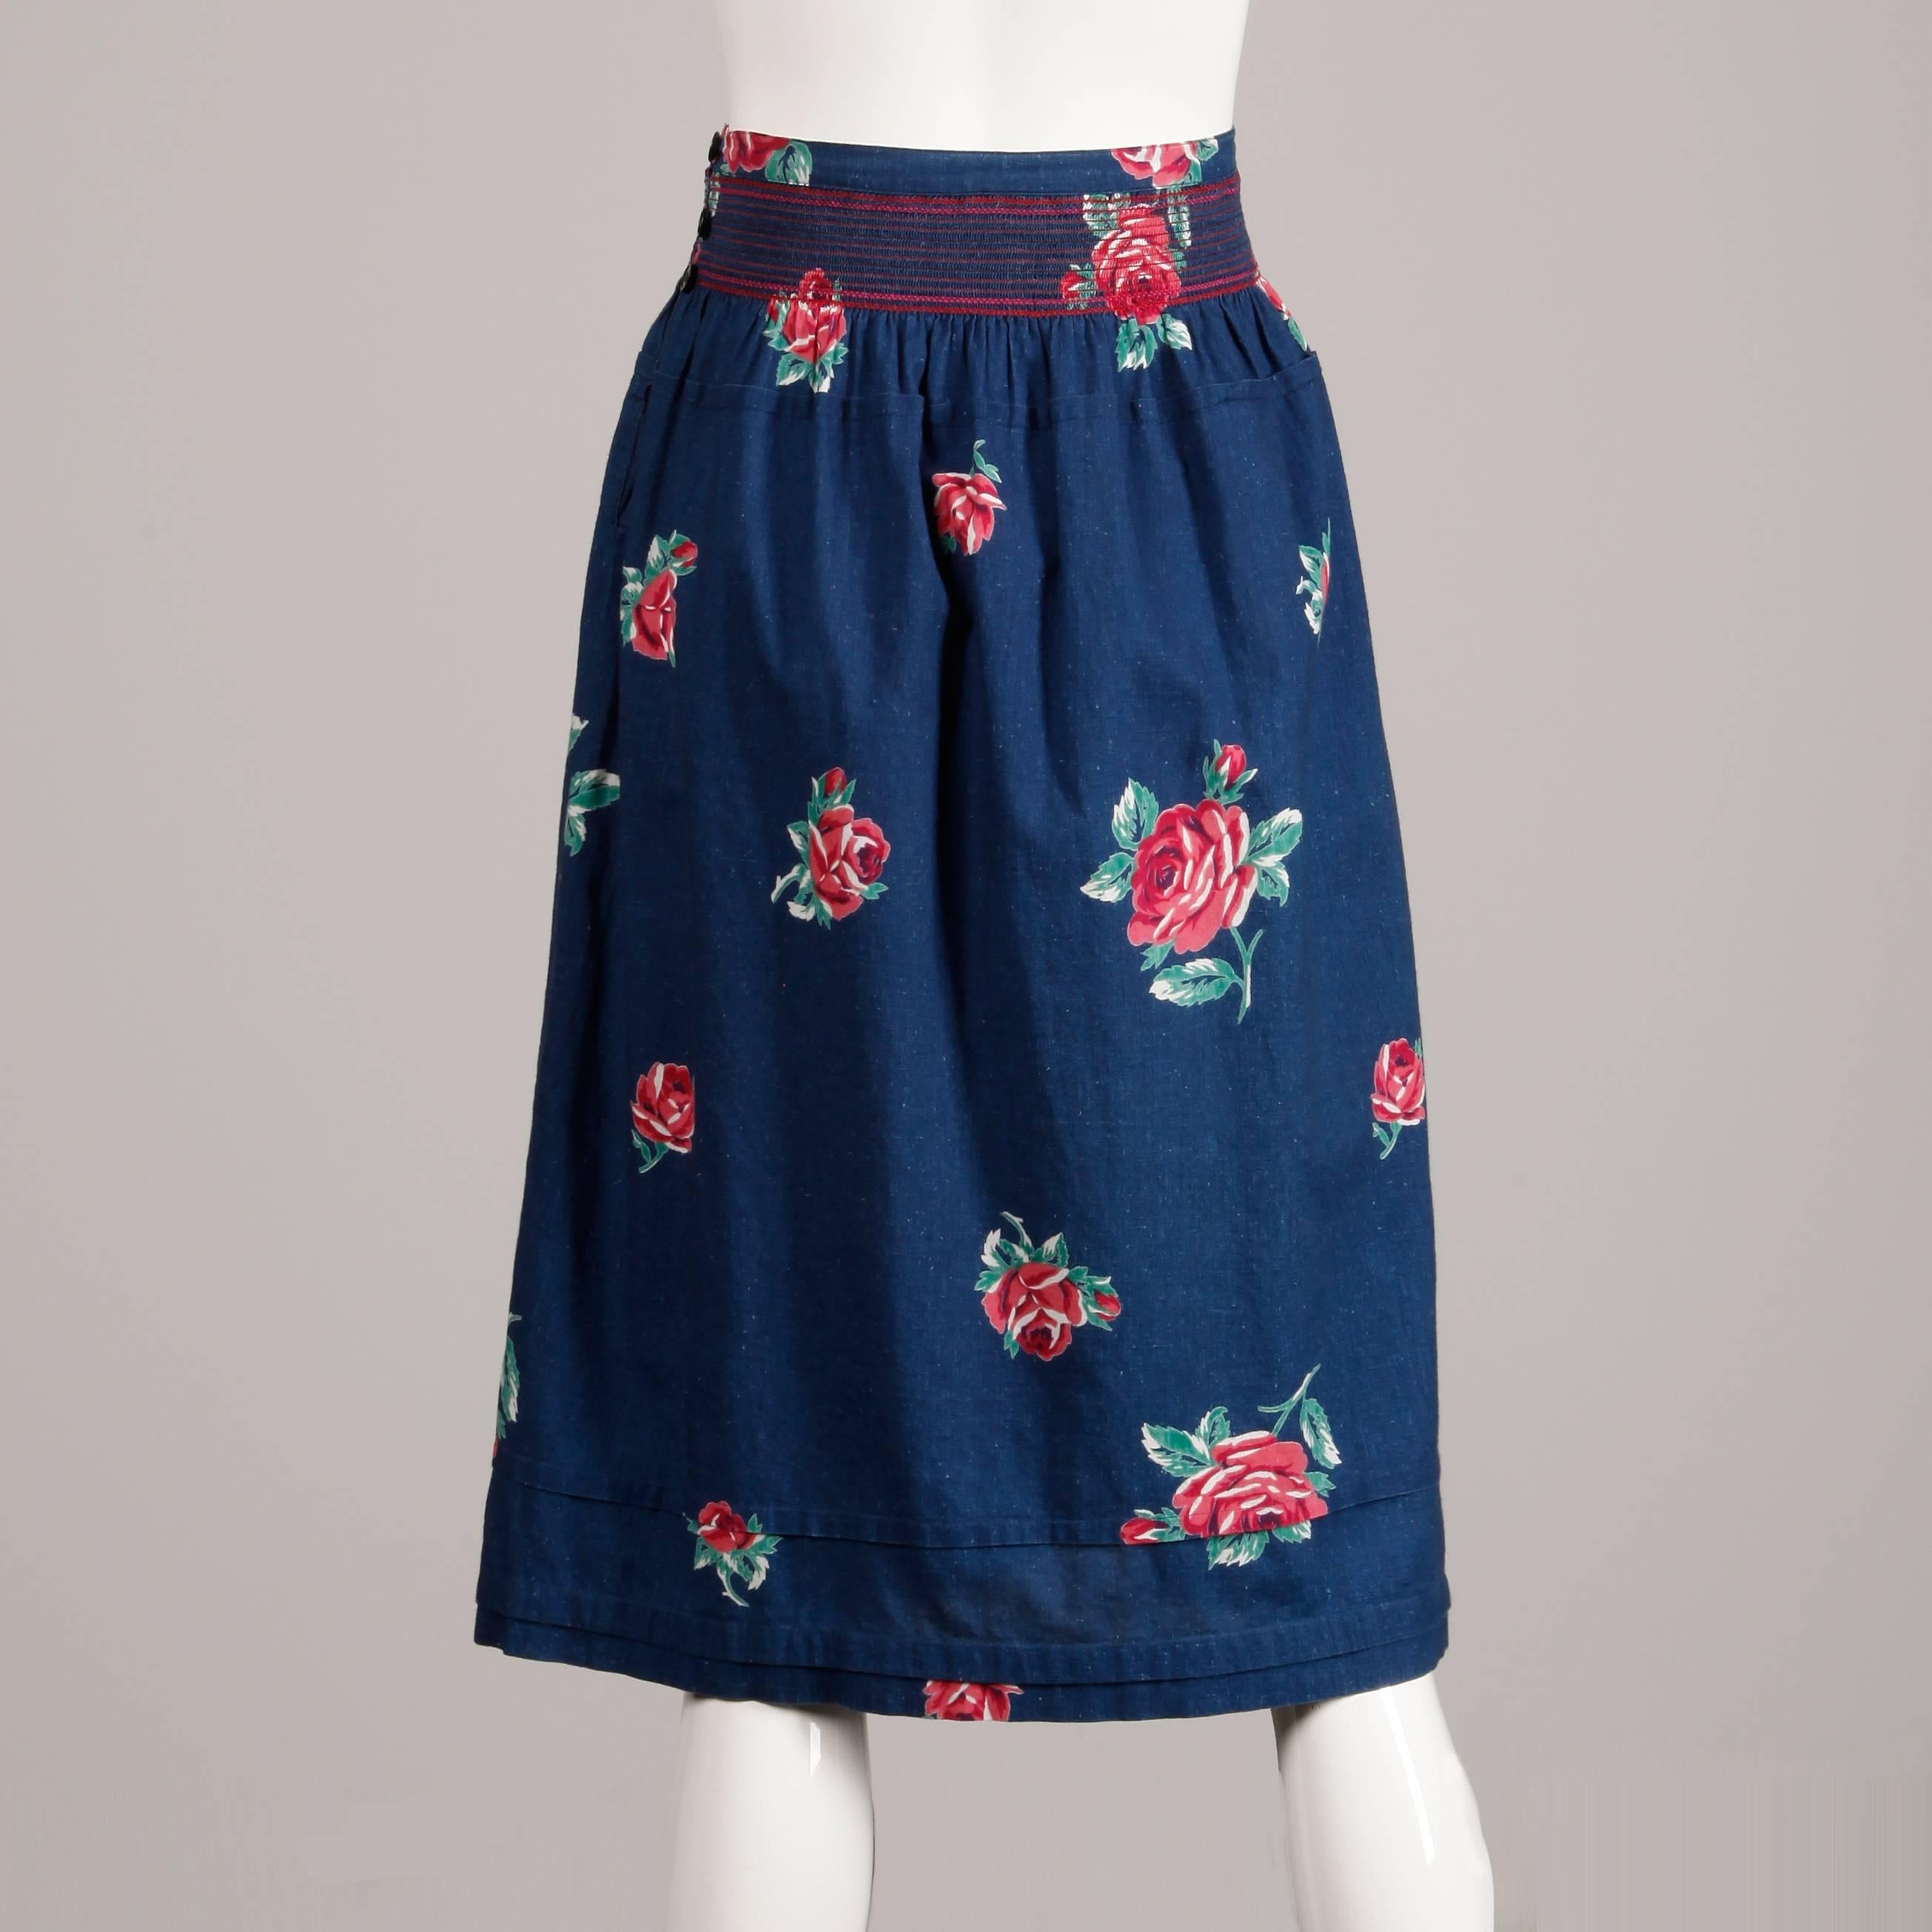 1970s Kenzo Vintage Blue Denim Chambray Jeans Skirt with Floral Rose Print For Sale 1